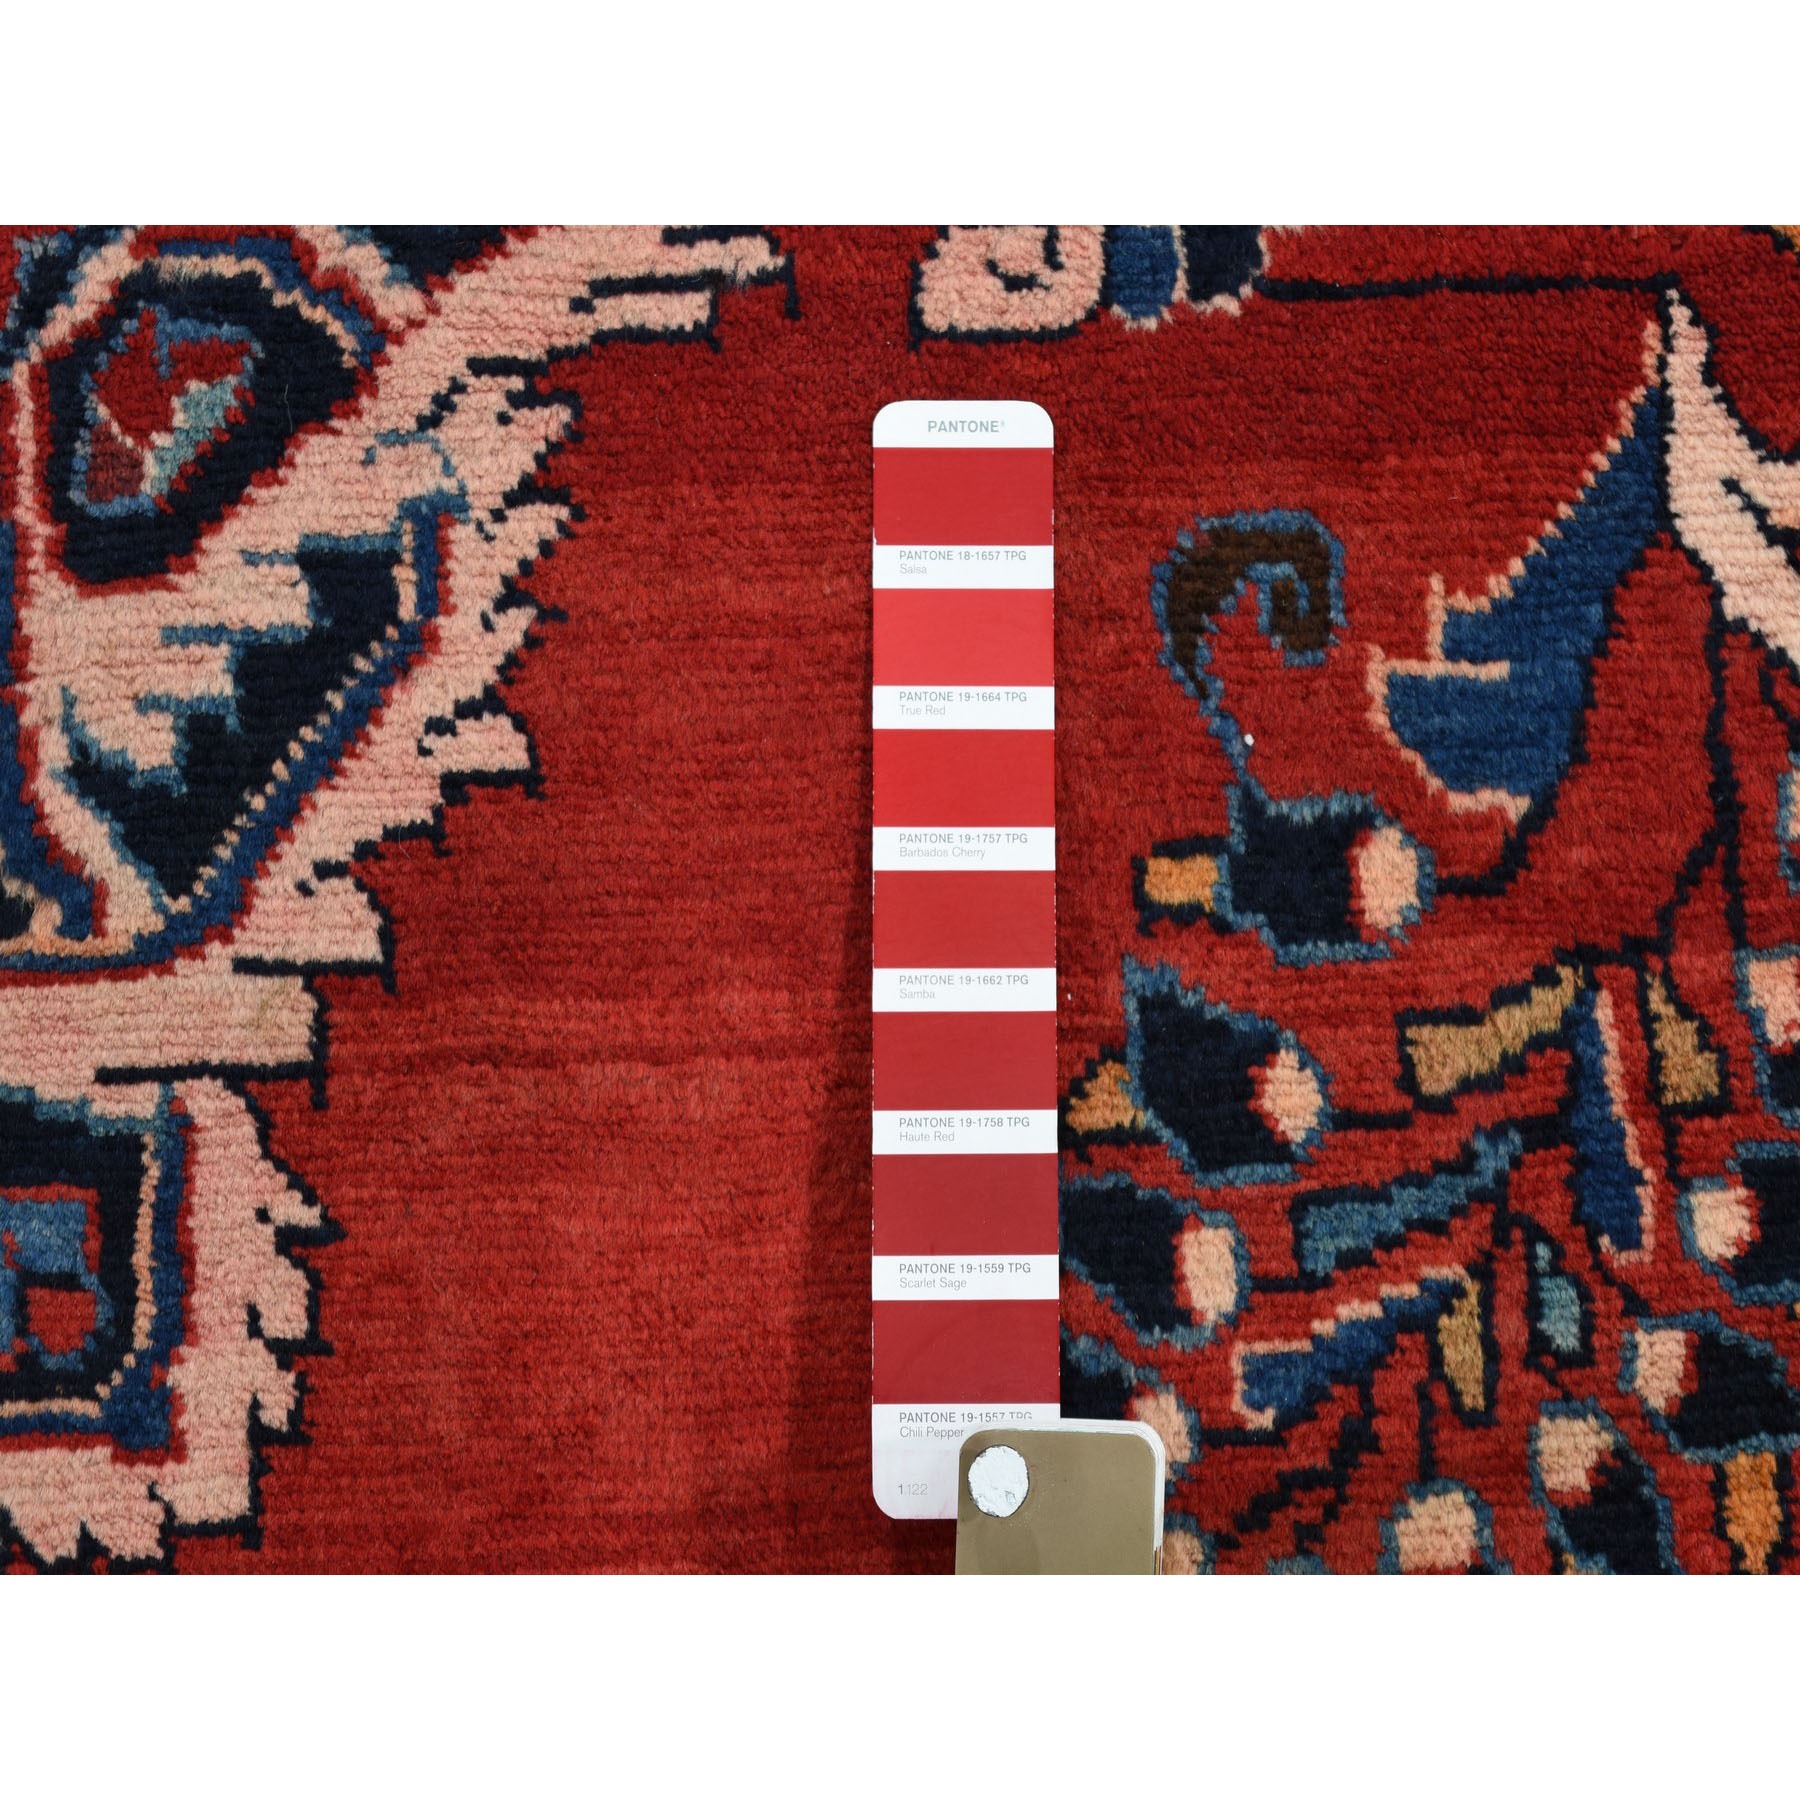 7'4"x10'2" Red New Persian Lilihan Pure Wool Hand Woven Oriental Rug 